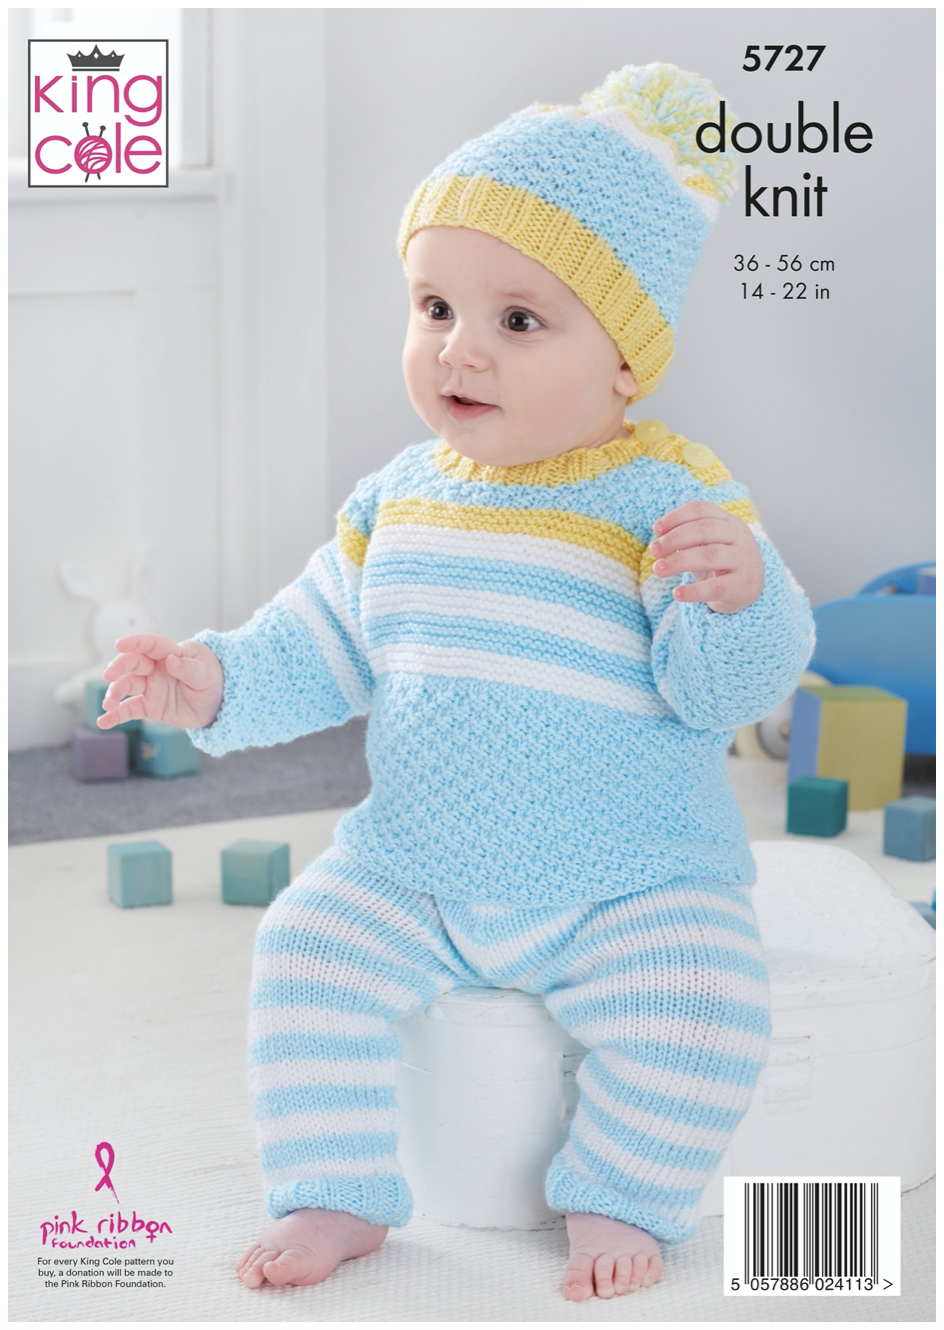 King Cole 5727 Baby Set in Cherished DK